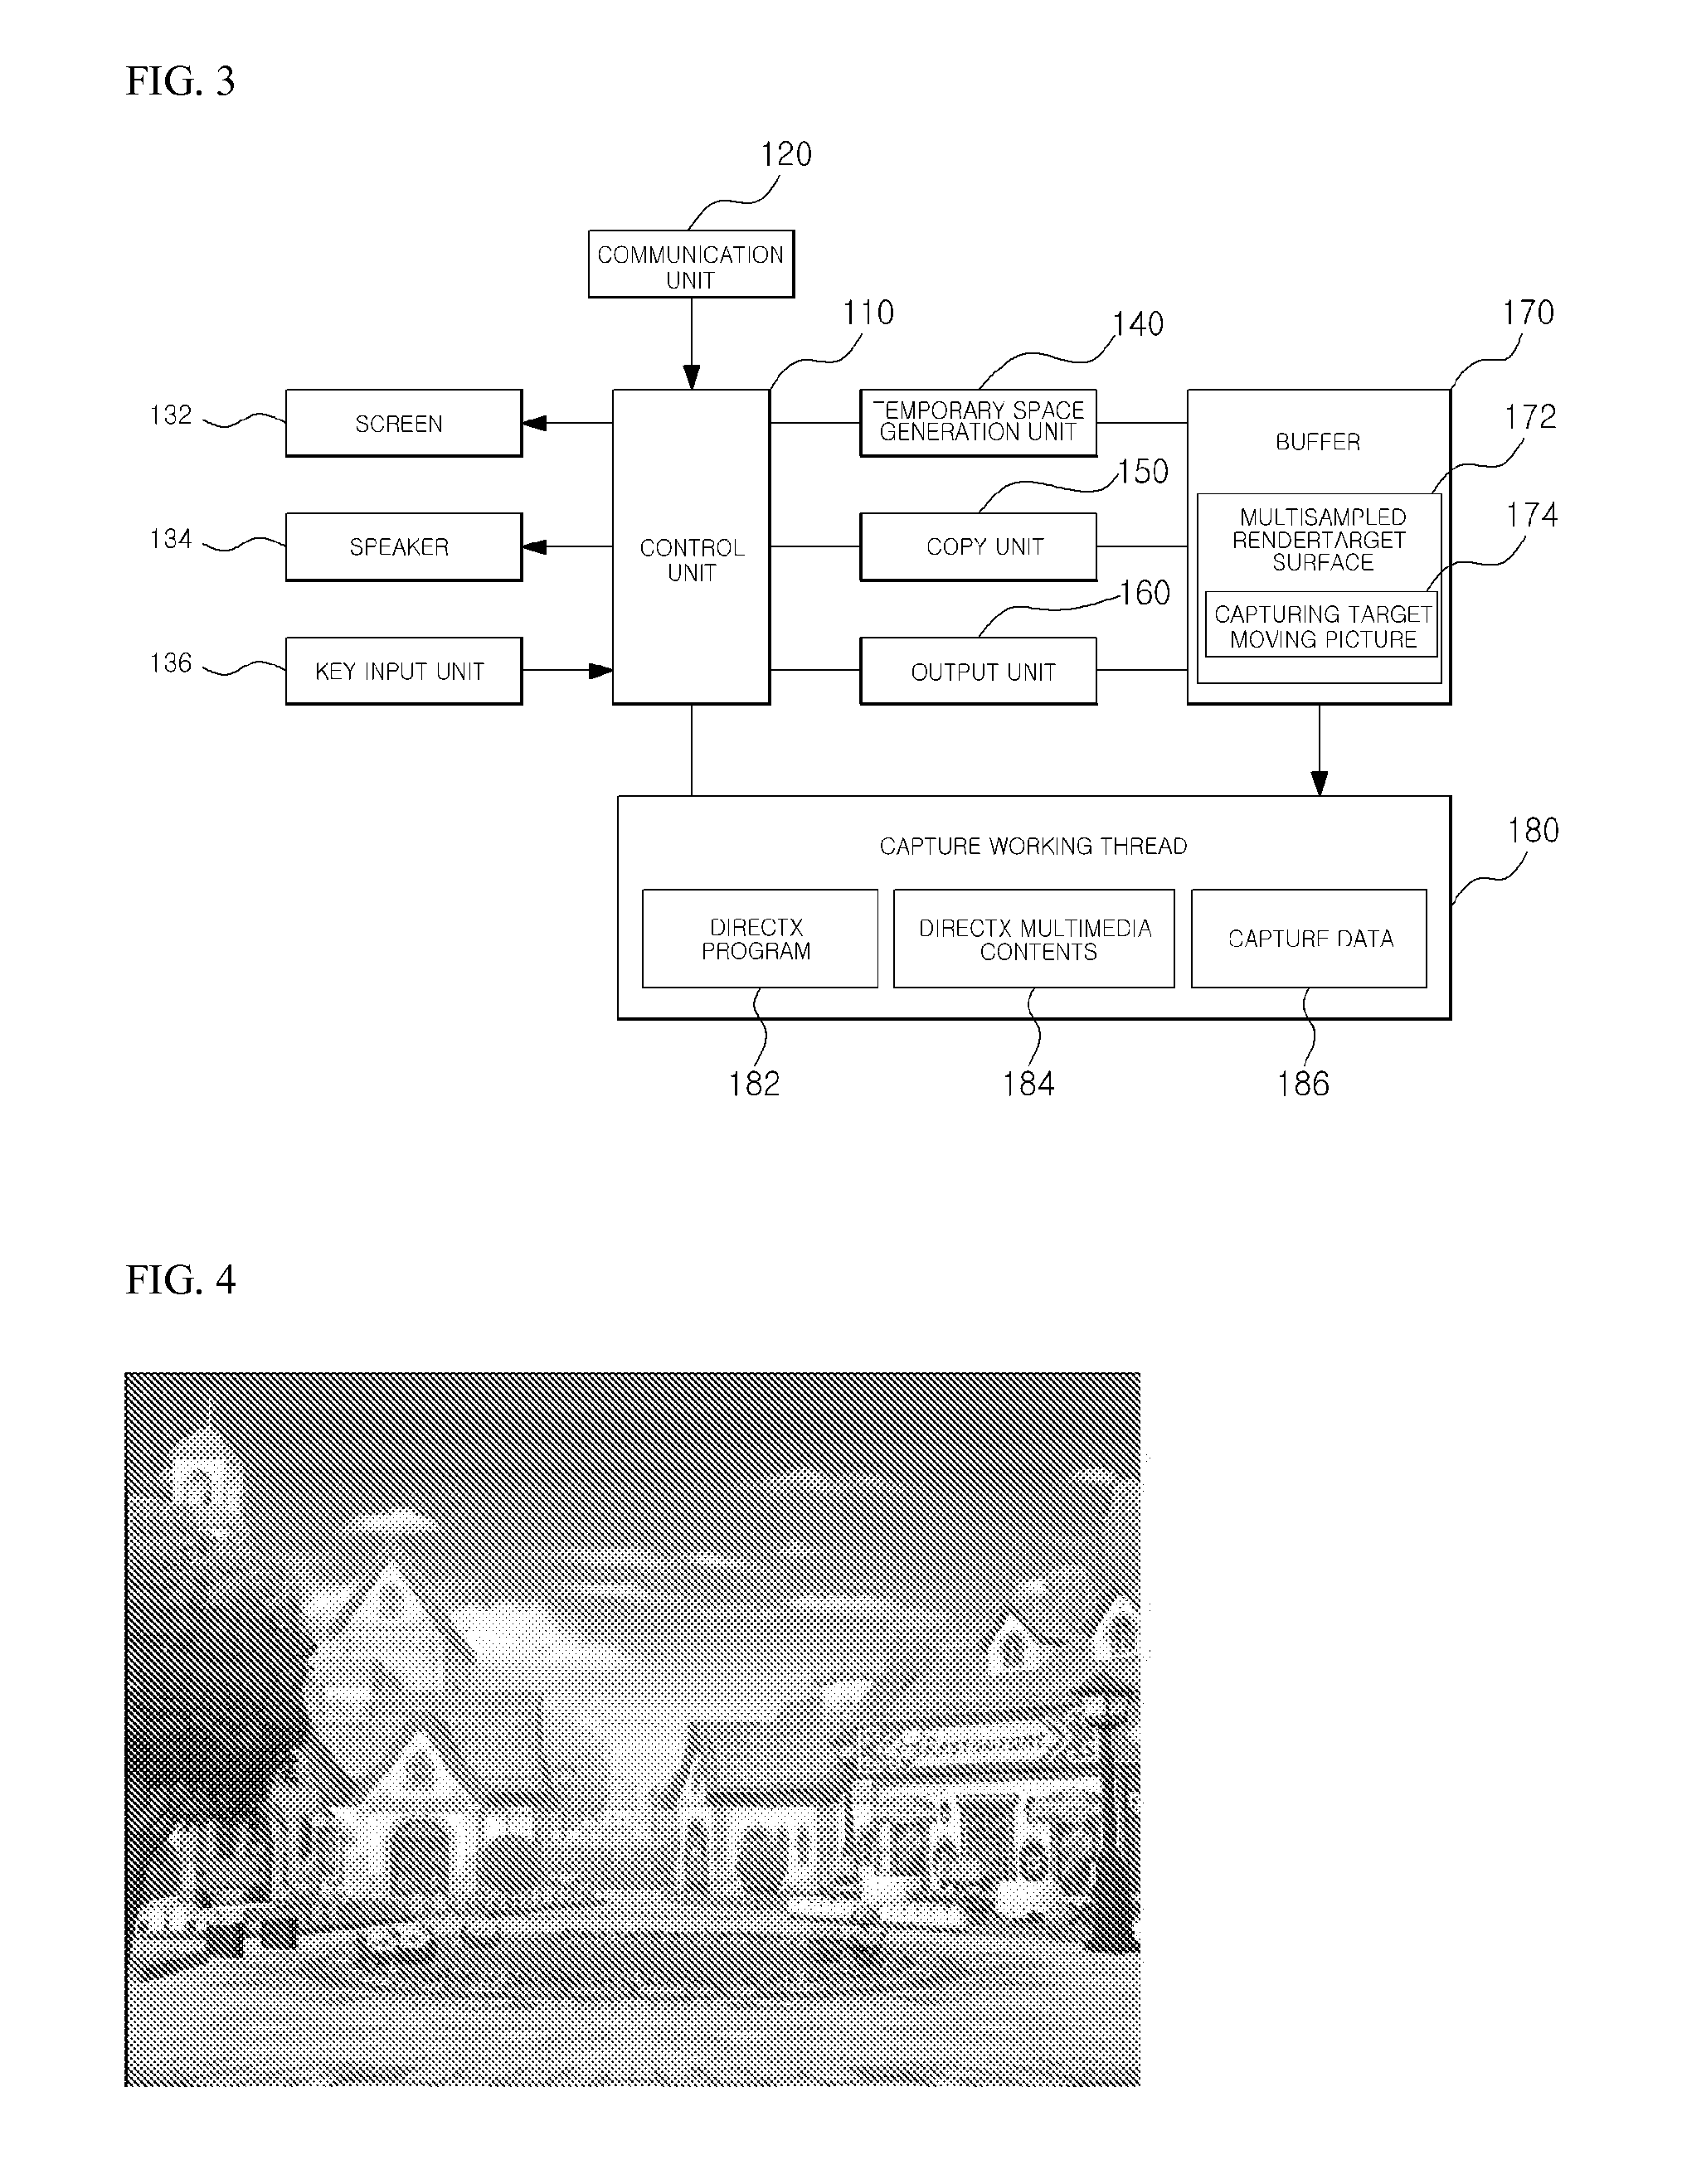 Method and apparatus for capturing Anti-aliasing directx multimedia contents moving picture